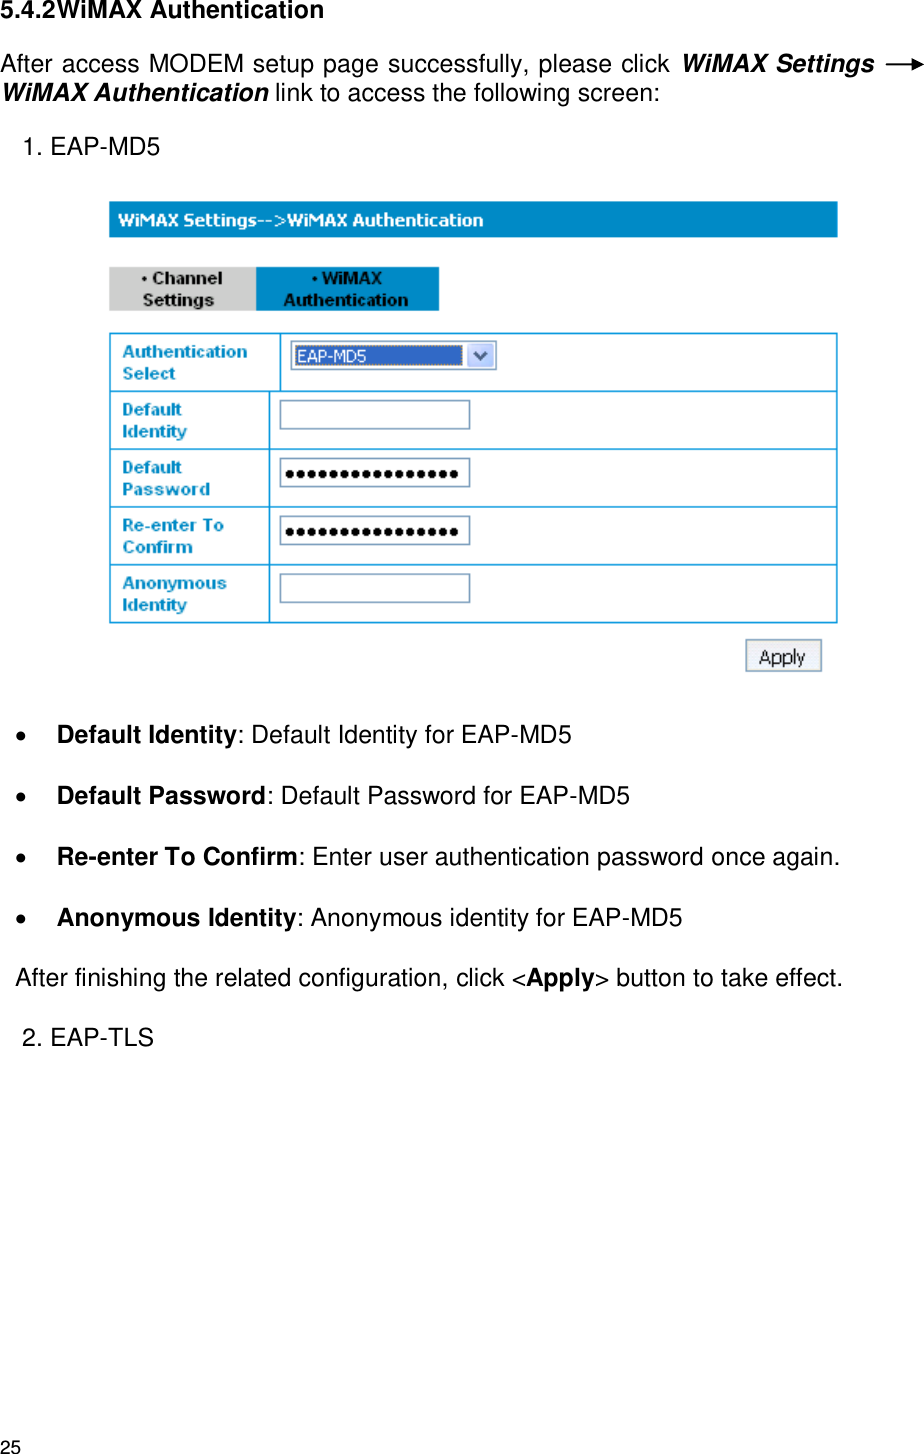 25 5.4.2 WiMAX Authentication   After access MODEM setup page successfully, please click WiMAX Settings WiMAX Authentication link to access the following screen: 1. EAP-MD5   Default Identity: Default Identity for EAP-MD5  Default Password: Default Password for EAP-MD5  Re-enter To Confirm: Enter user authentication password once again.  Anonymous Identity: Anonymous identity for EAP-MD5 After finishing the related configuration, click &lt;Apply&gt; button to take effect. 2. EAP-TLS 